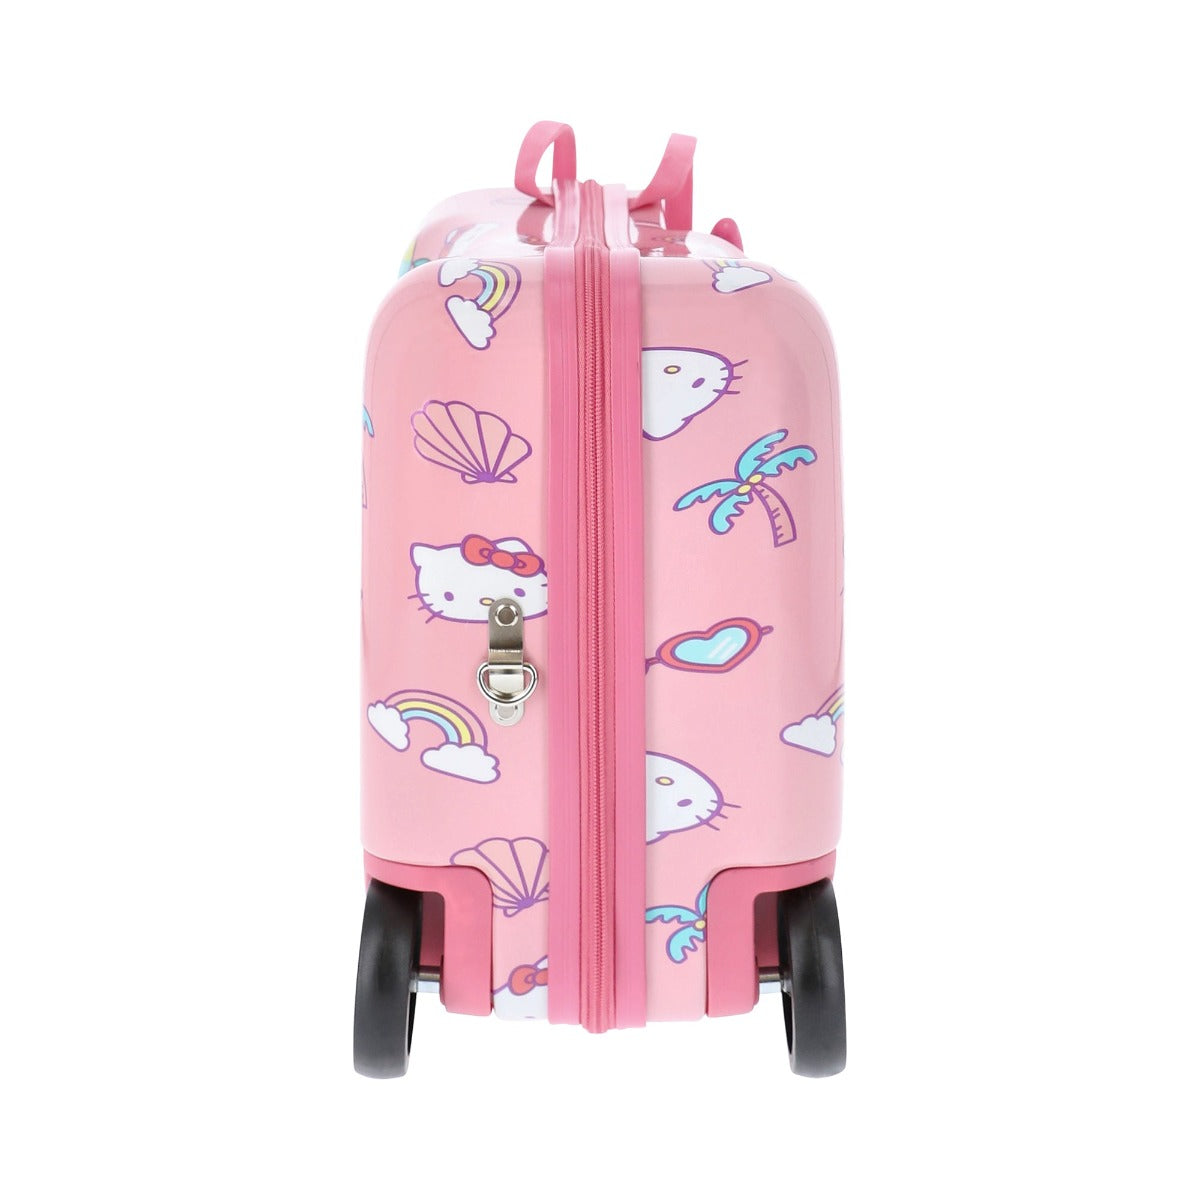 Pink Hello Kitty Summertime ride-on suitcase - 14.5 inch carry-on ride-along rolling luggage for kids